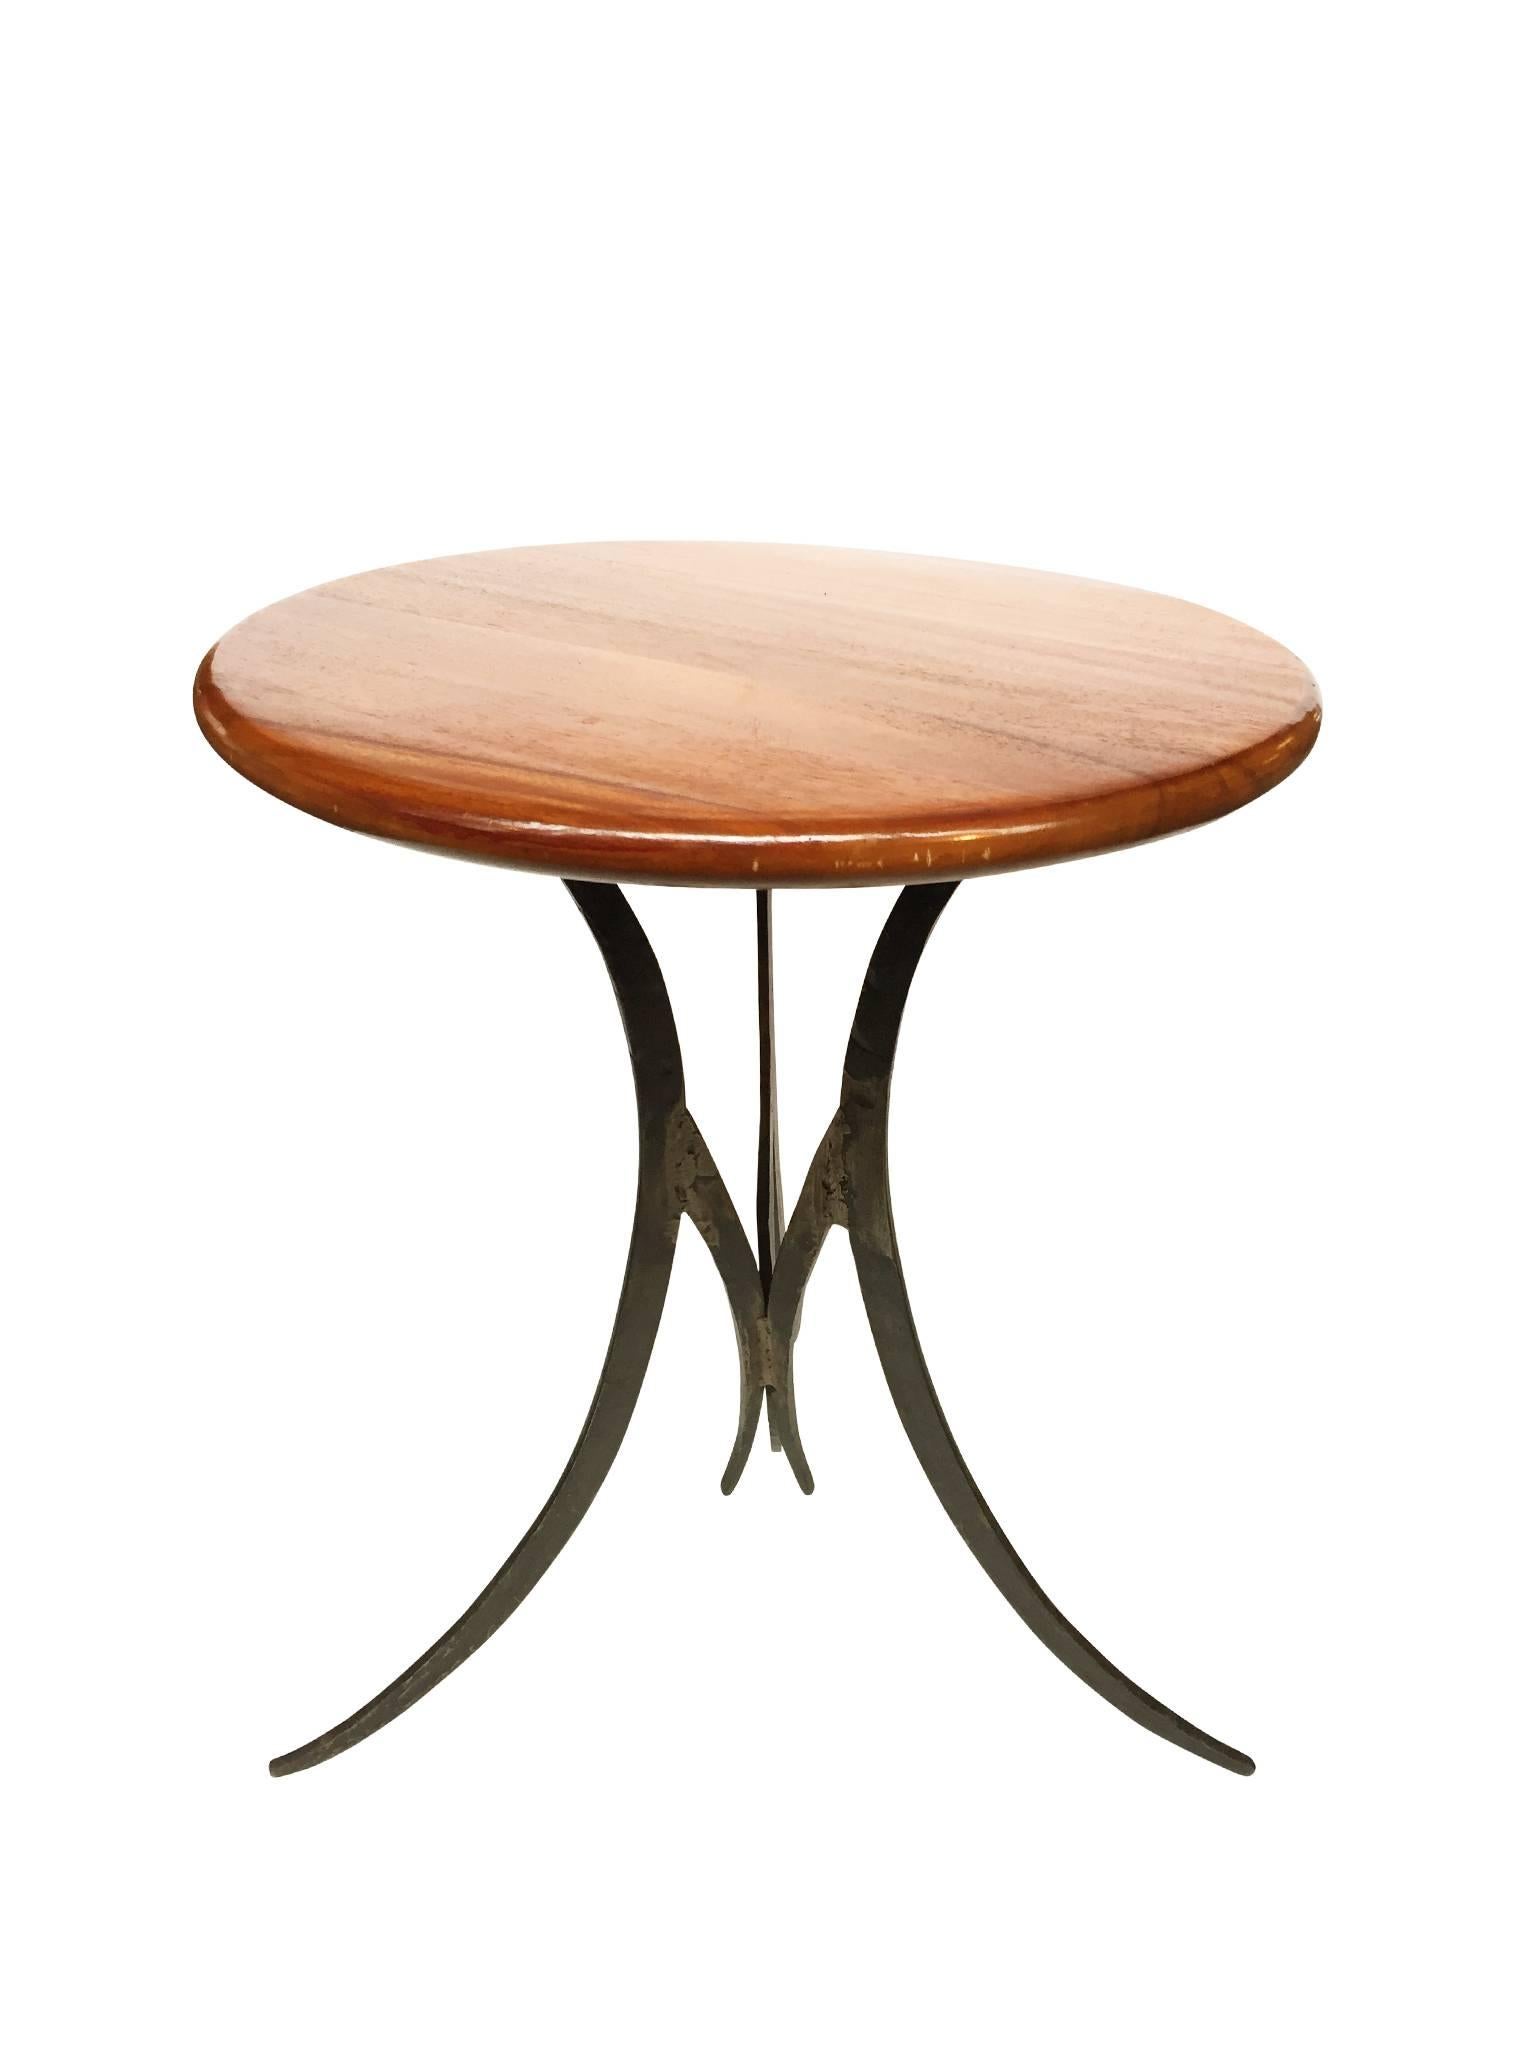 This unique vintage side or end table is comprised of a round, lacquered teak top and a Brutalist-style iron base. The fine wood striations of the teak add an ornamental element to the design, while the base is a mix of smooth edges and bold, curved